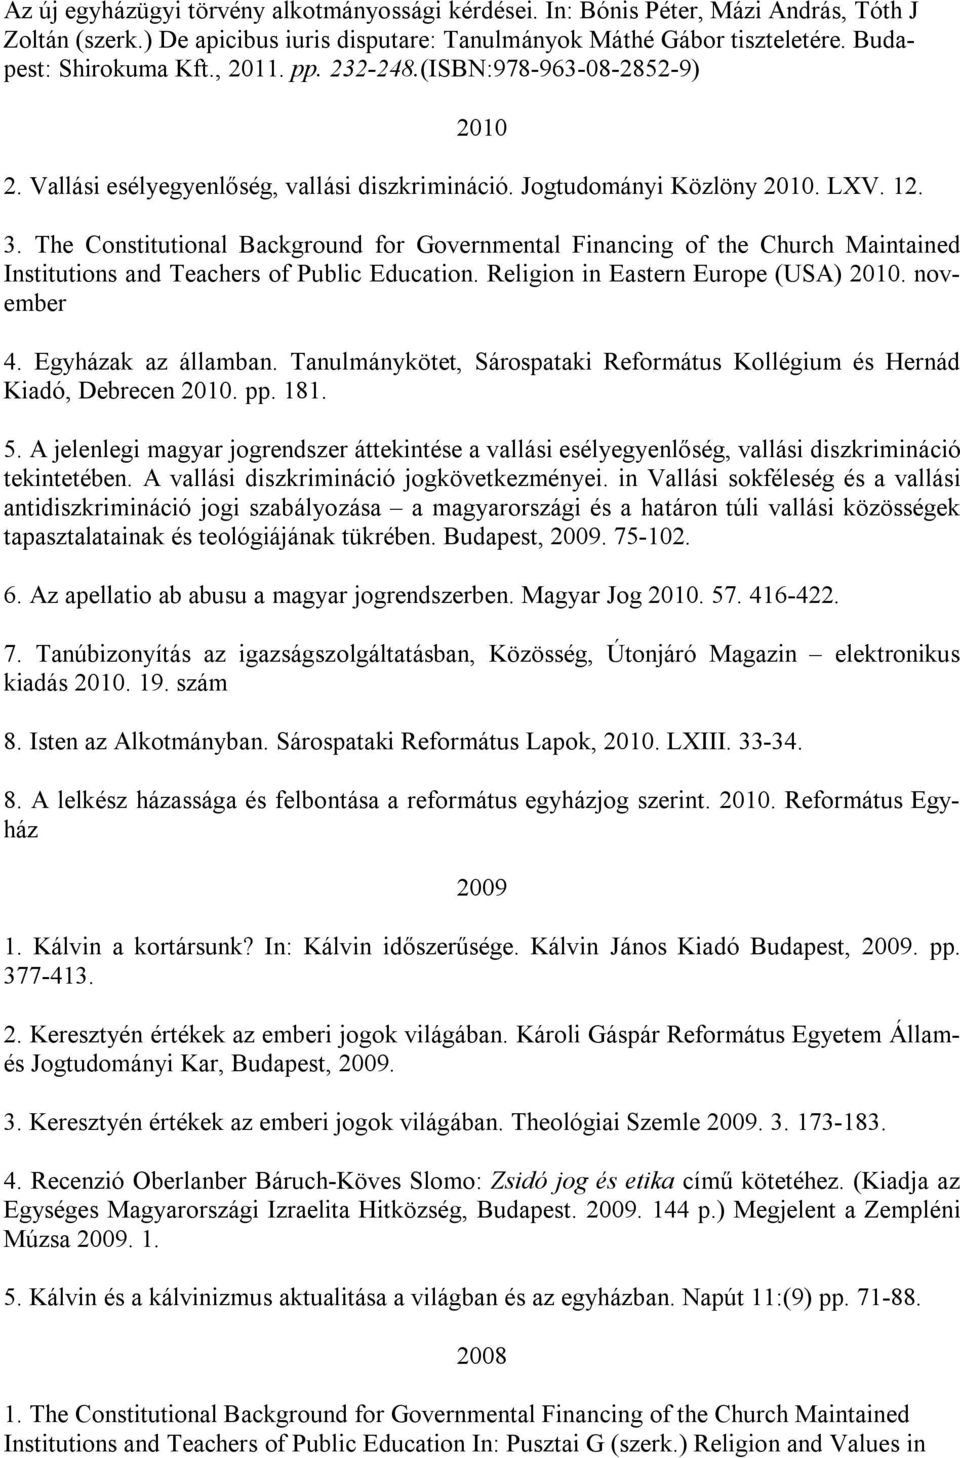 The Constitutional Background for Governmental Financing of the Church Maintained Institutions and Teachers of Public Education. Religion in Eastern Europe (USA) 2010. november 4.